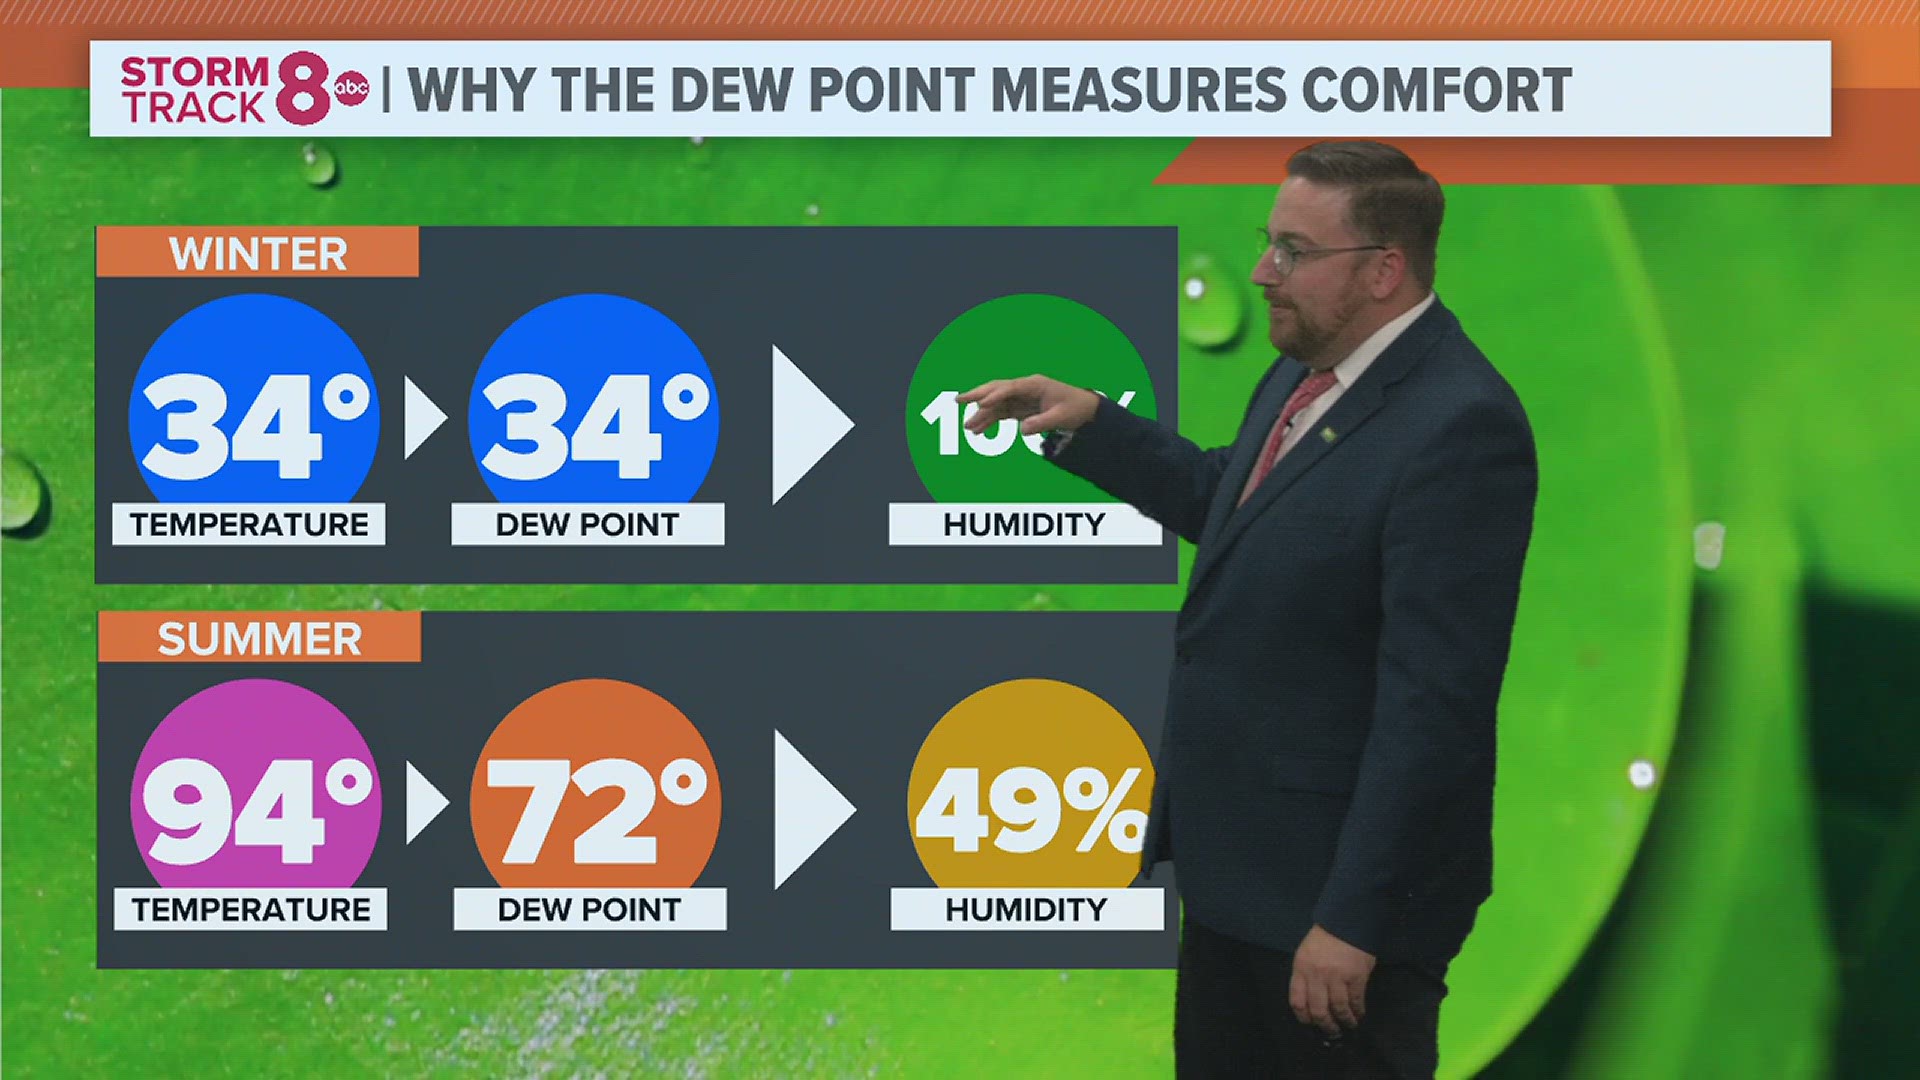 You'll often hear about it feeling "humid" outside but, it's not the humidity, but rather the dew point that makes it feel uncomfortable. Here's why.